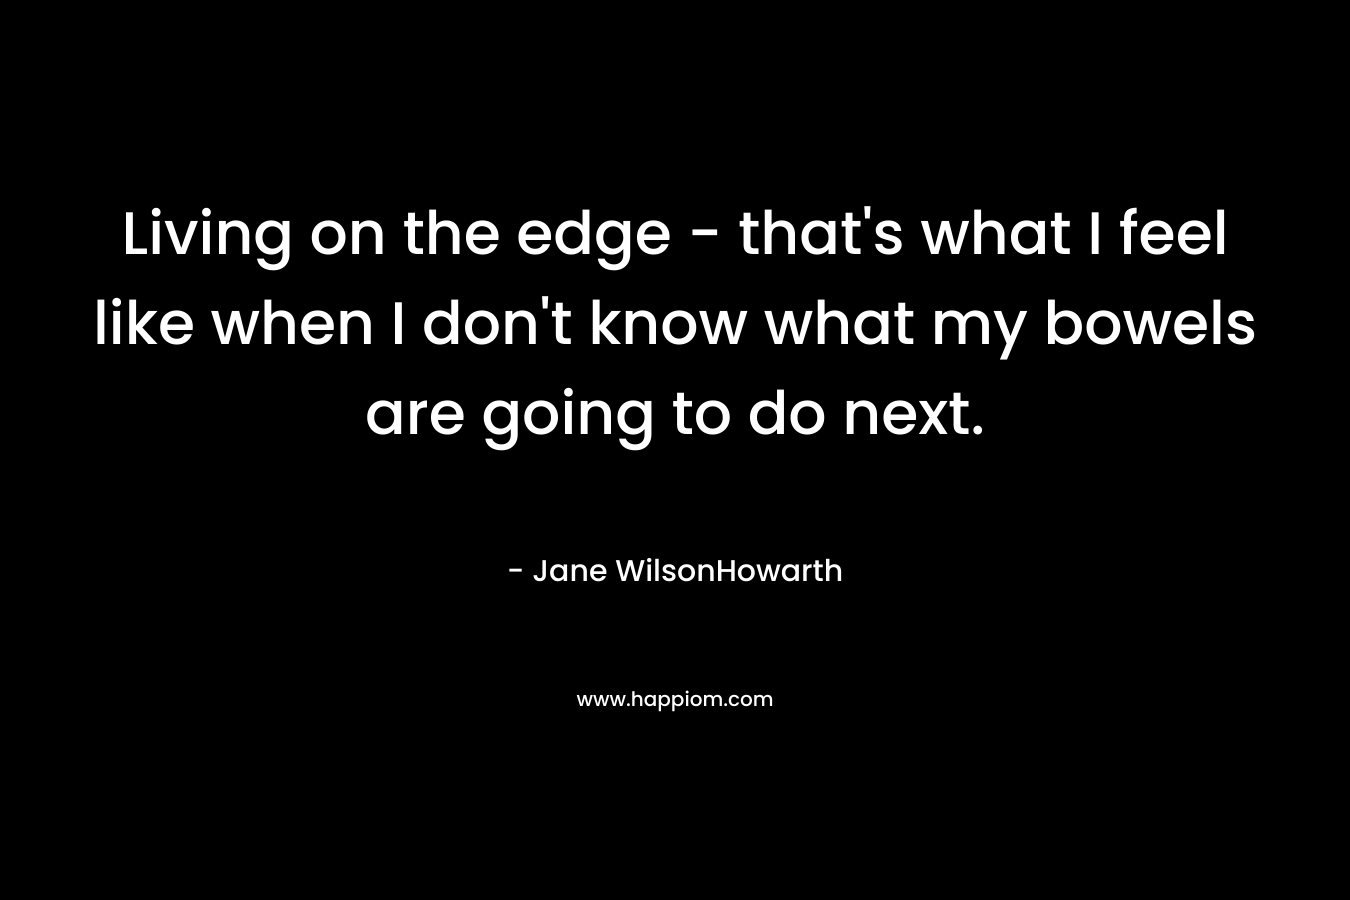 Living on the edge – that’s what I feel like when I don’t know what my bowels are going to do next. – Jane WilsonHowarth